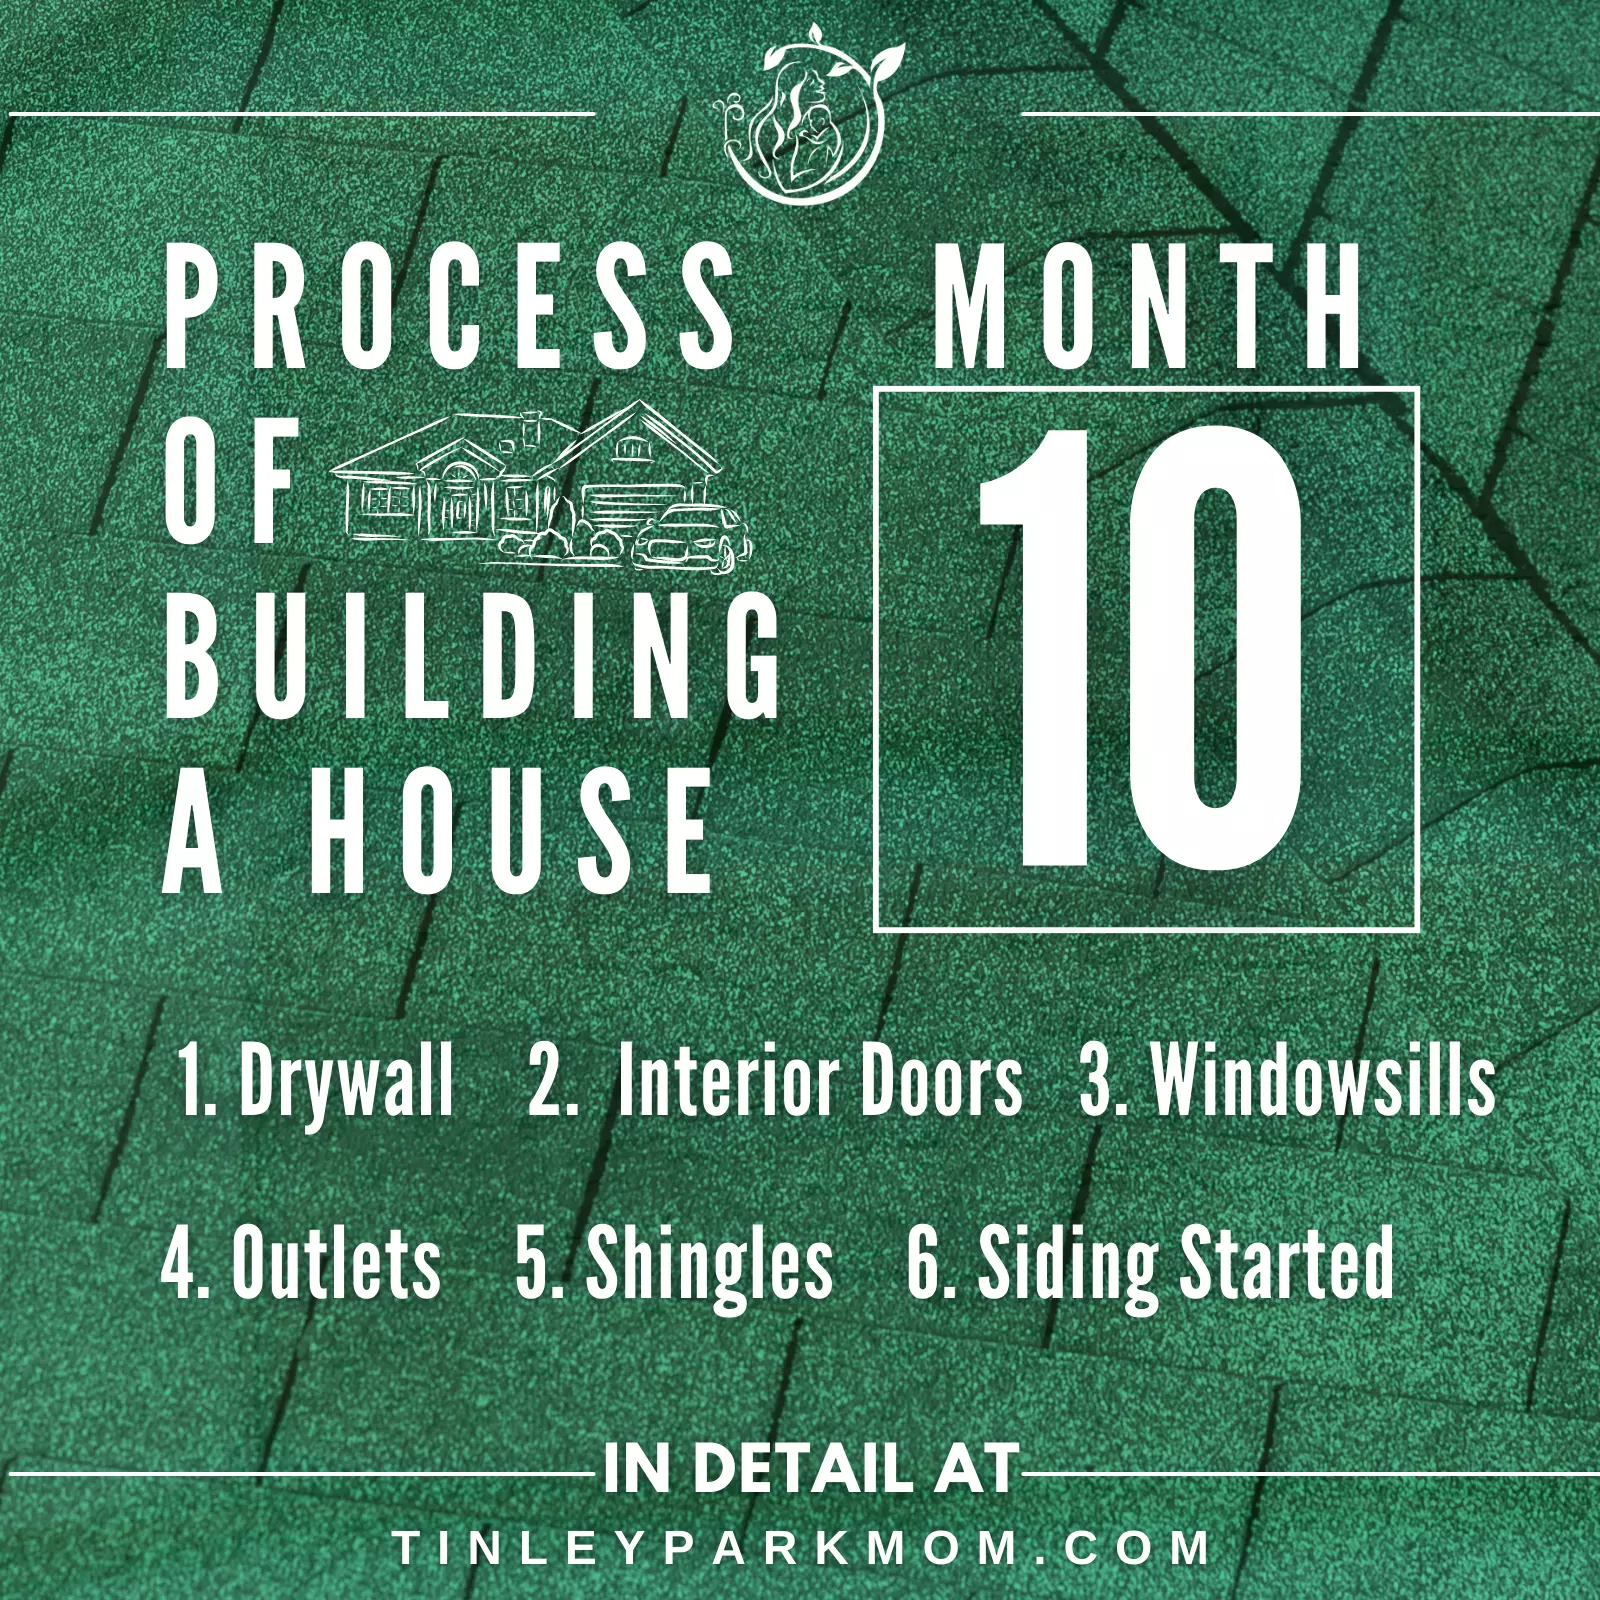 PROCESS OF BUILDING A HOUSE 1. Drywall 2. Interior Doors 3. Windowsills 4. Outlets 5. Shingles 6. Siding